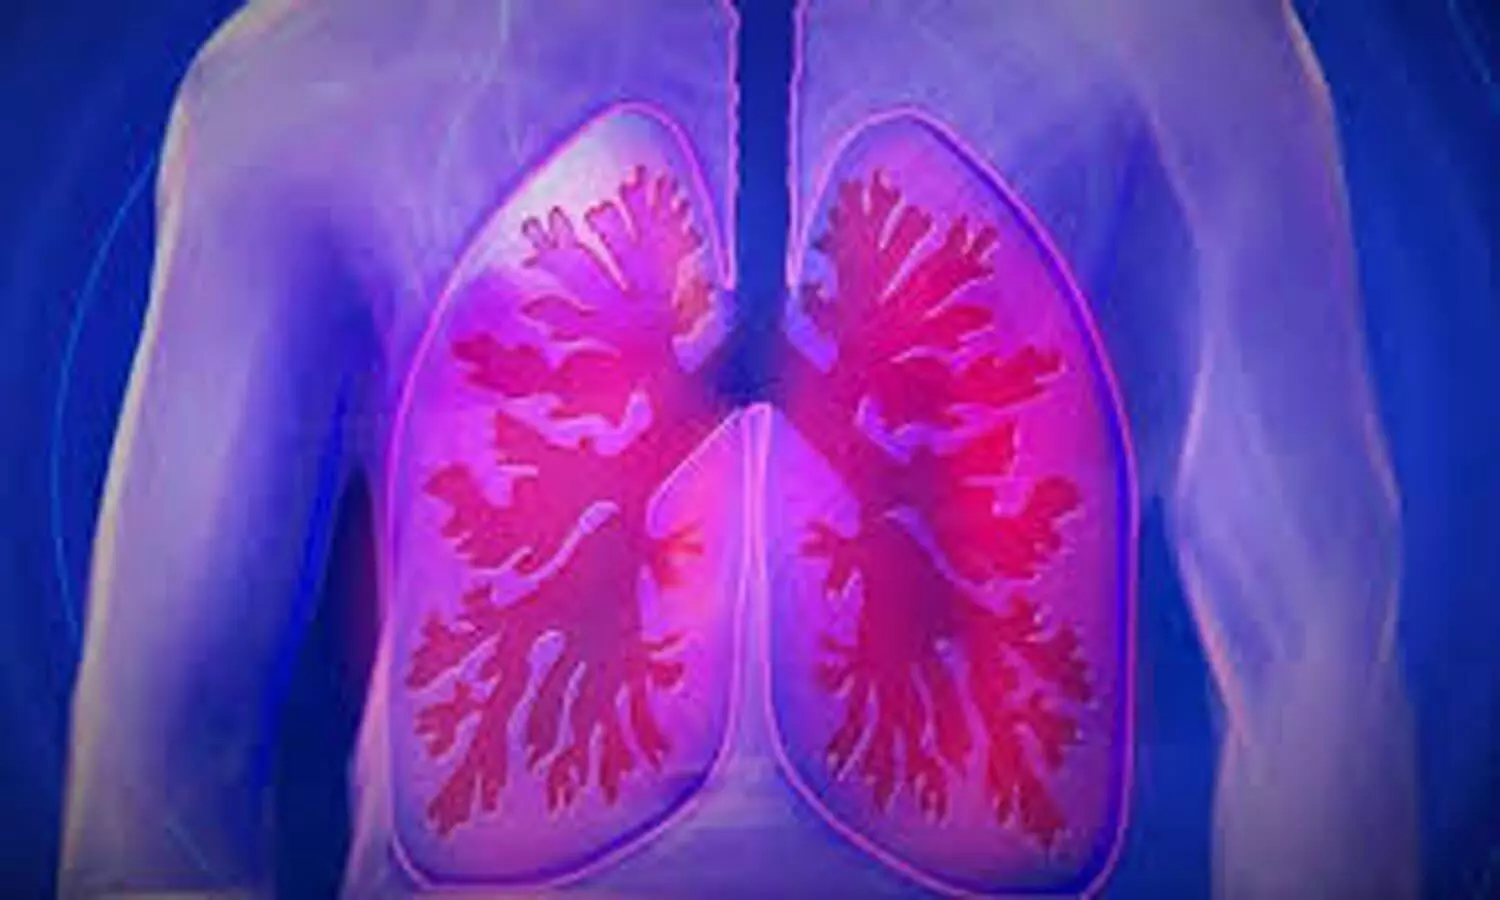 Xenon MRI detects long-term lung damage in COVID patients even after normal CT: Study